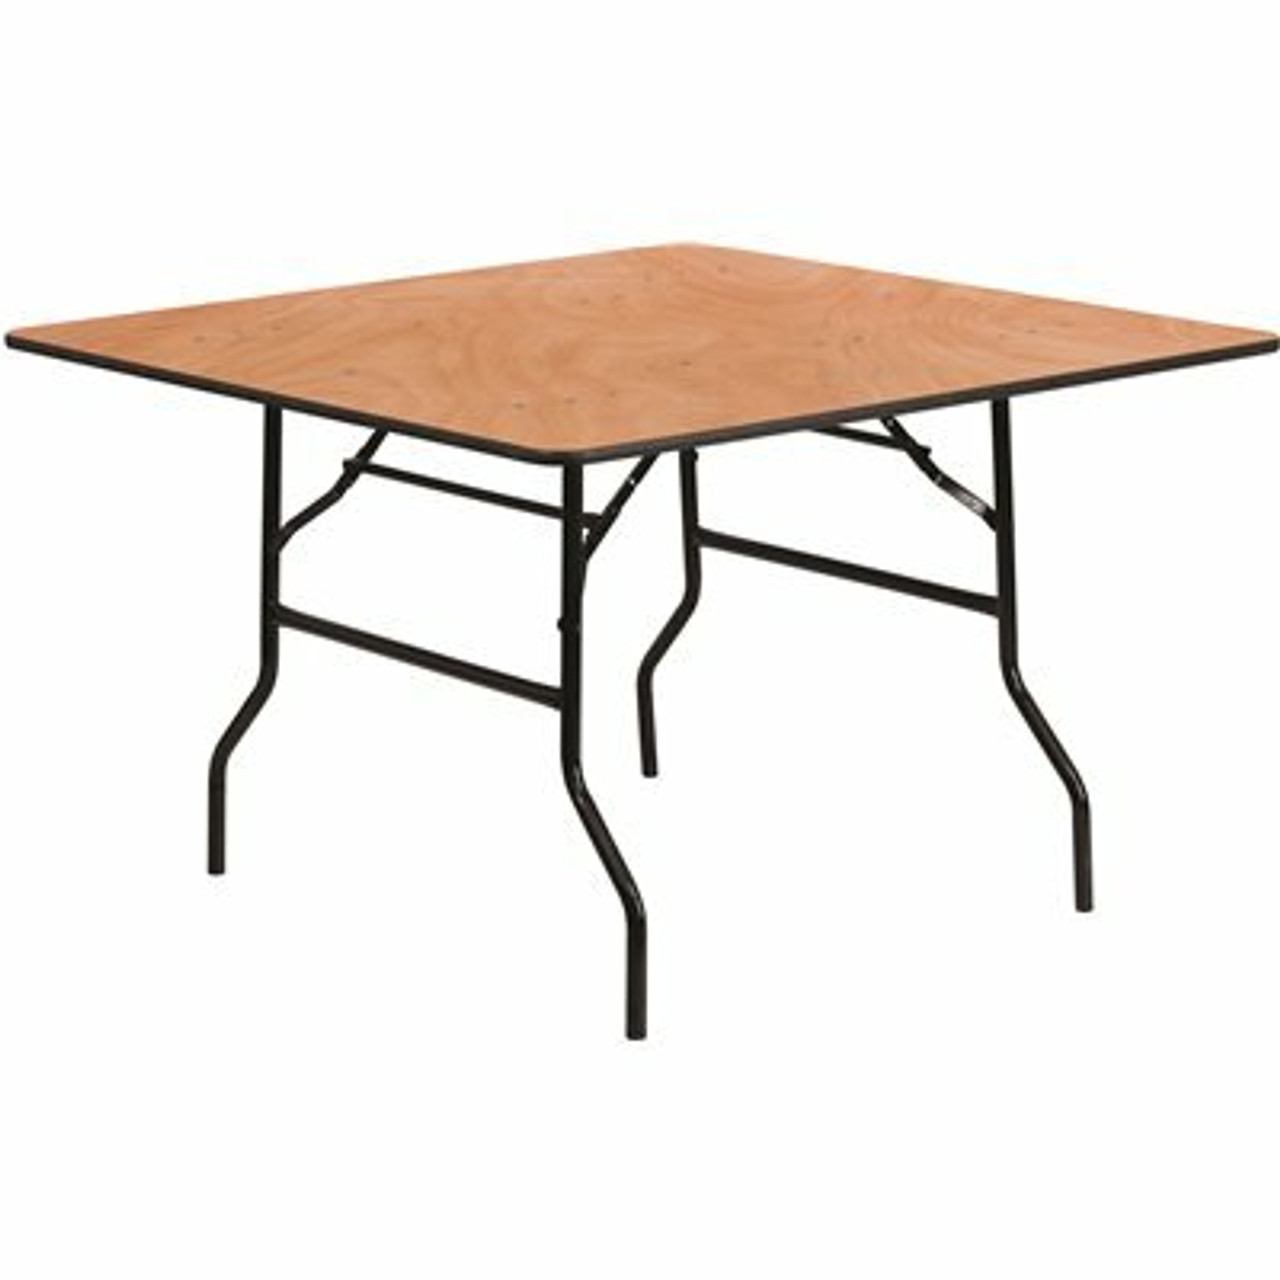 48 In. Natural Wood Tabletop Metal Frame Folding Table - 308688176